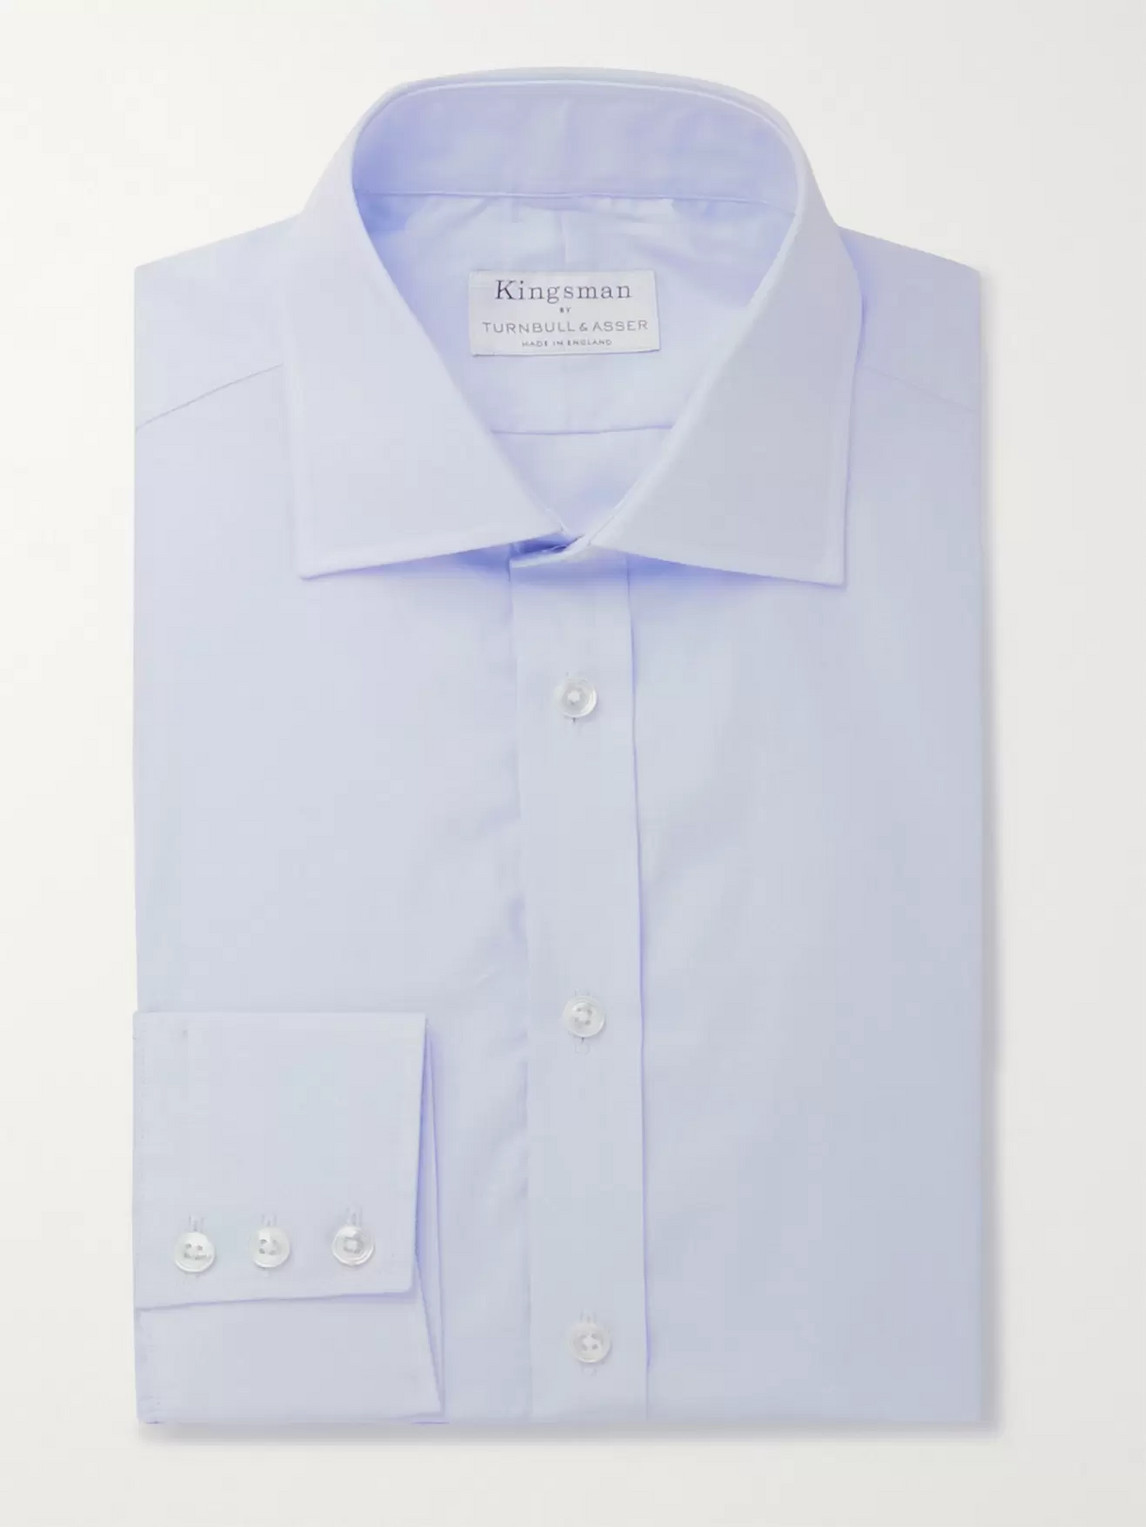 Kingsman Turnbull & Asser Blue Prince Of Wales Checked Cotton Shirt